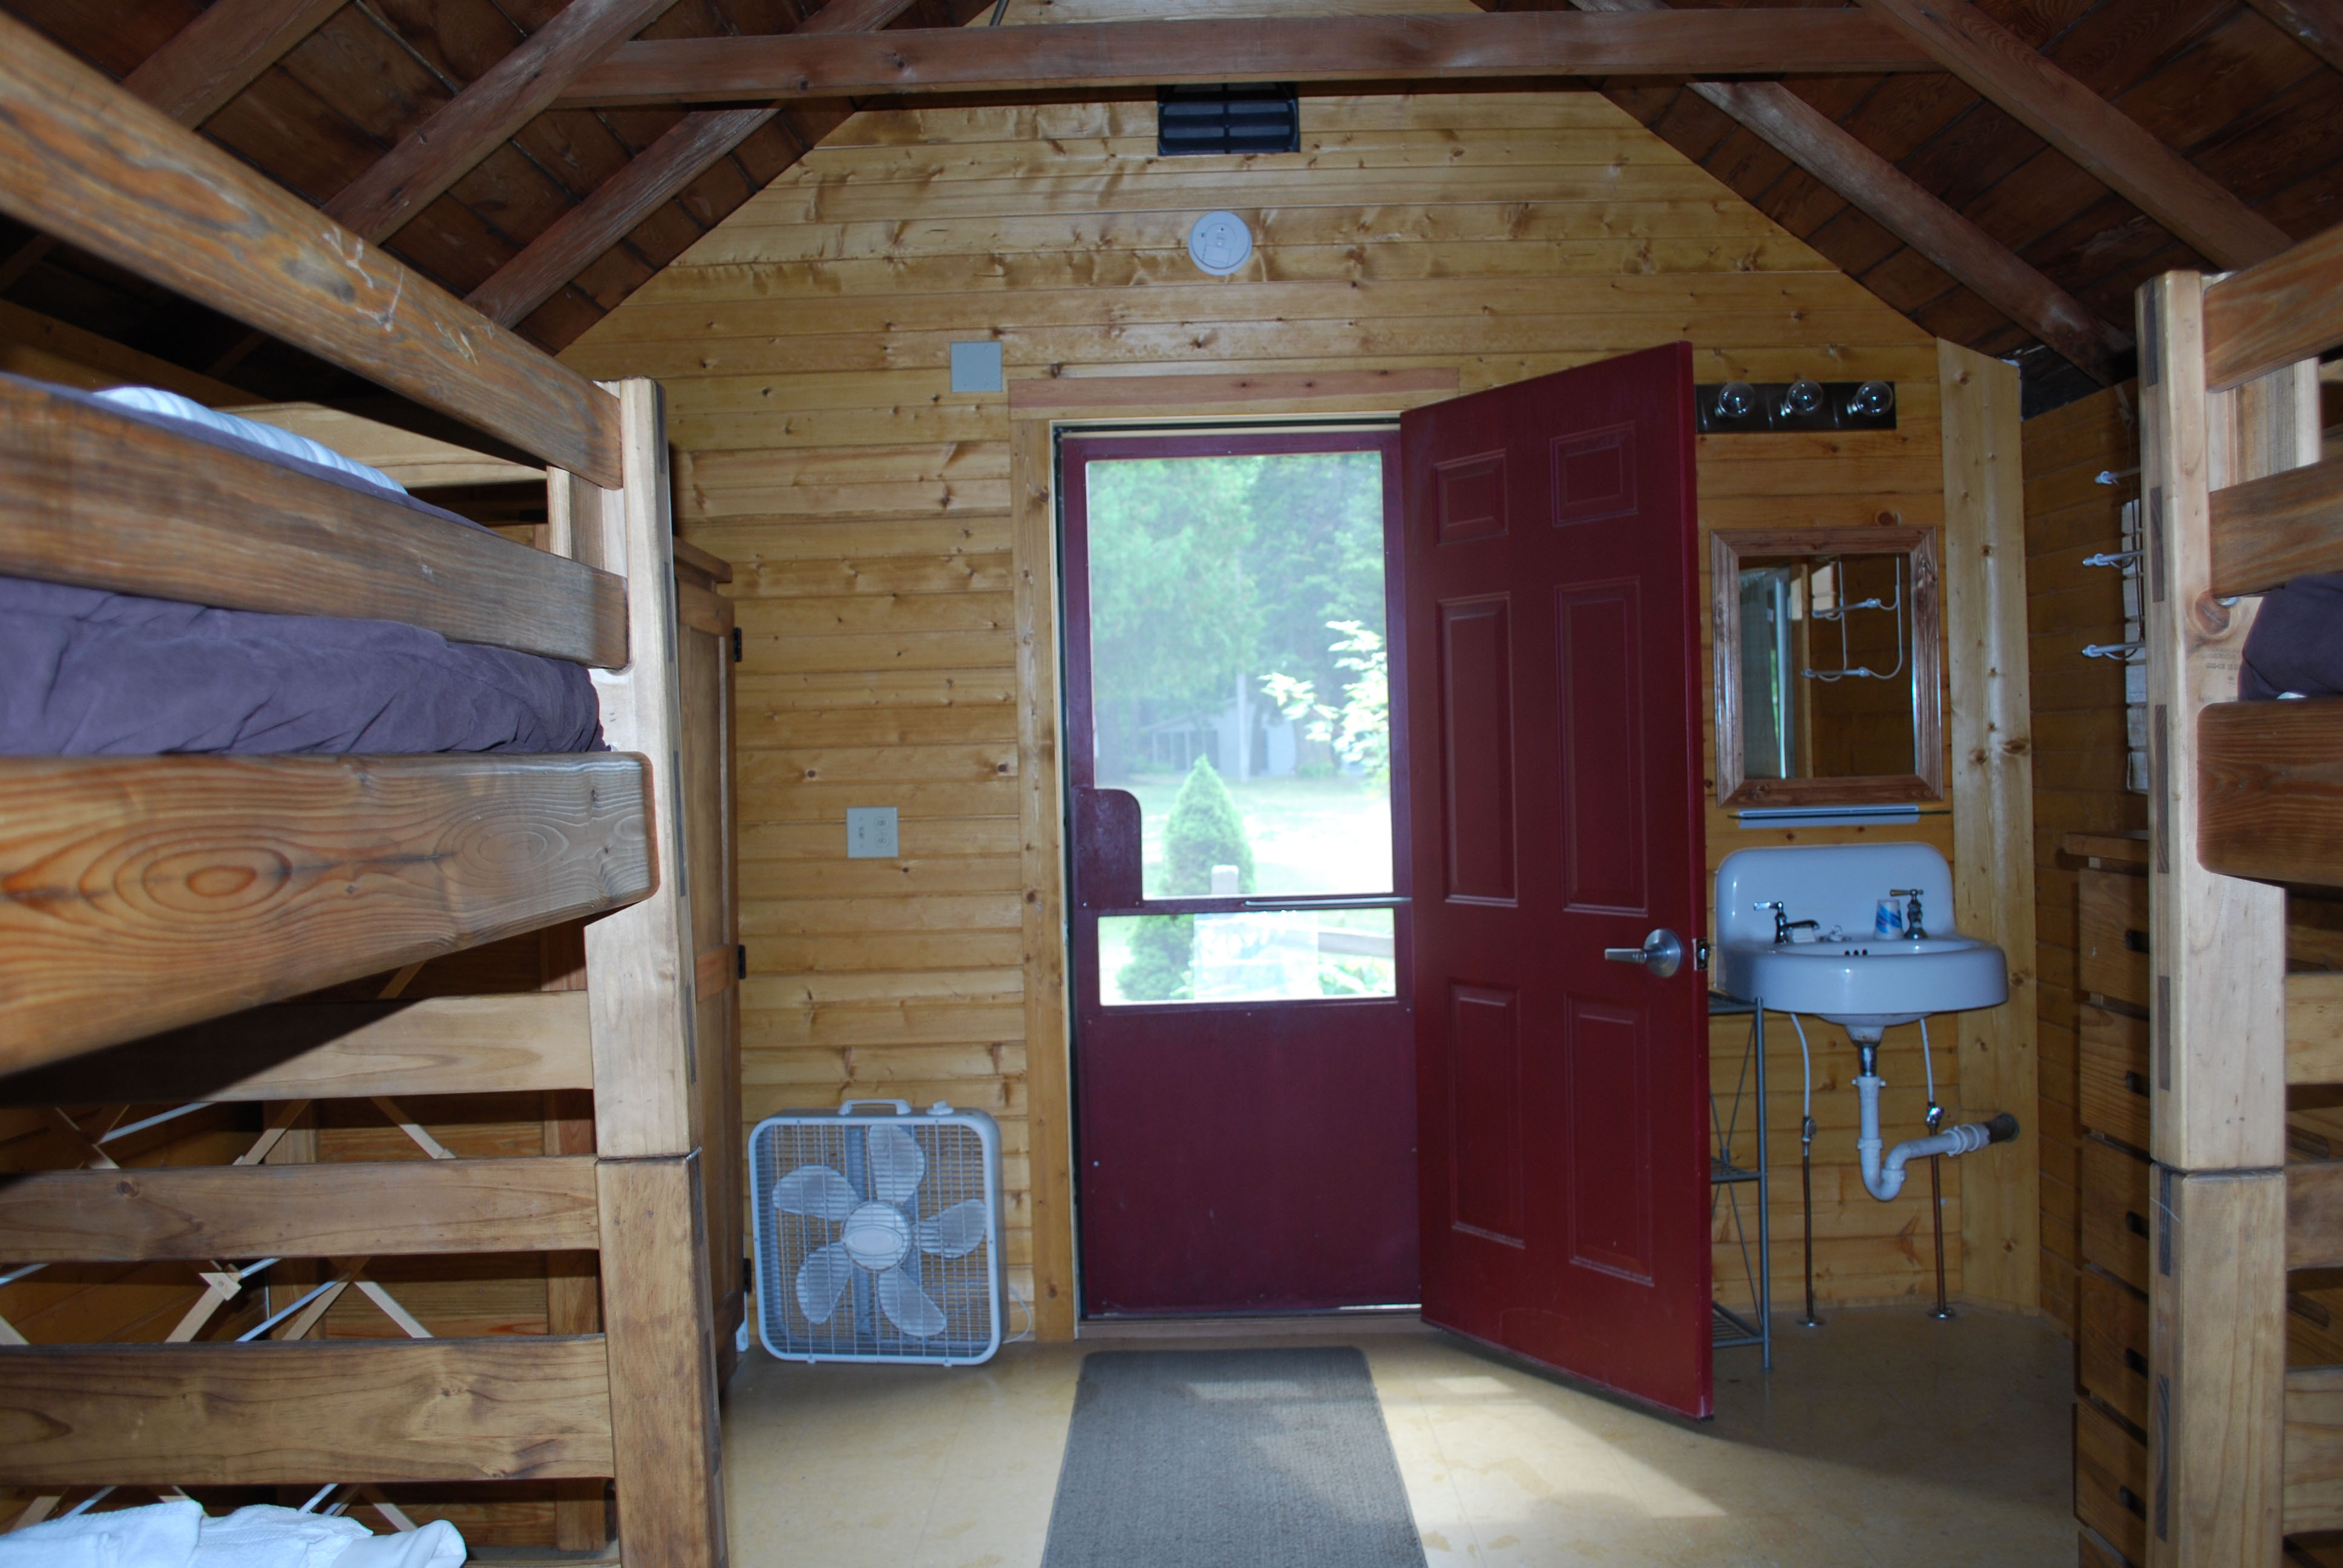 Inside of cabin on the hill room with bunkbeds from another angle